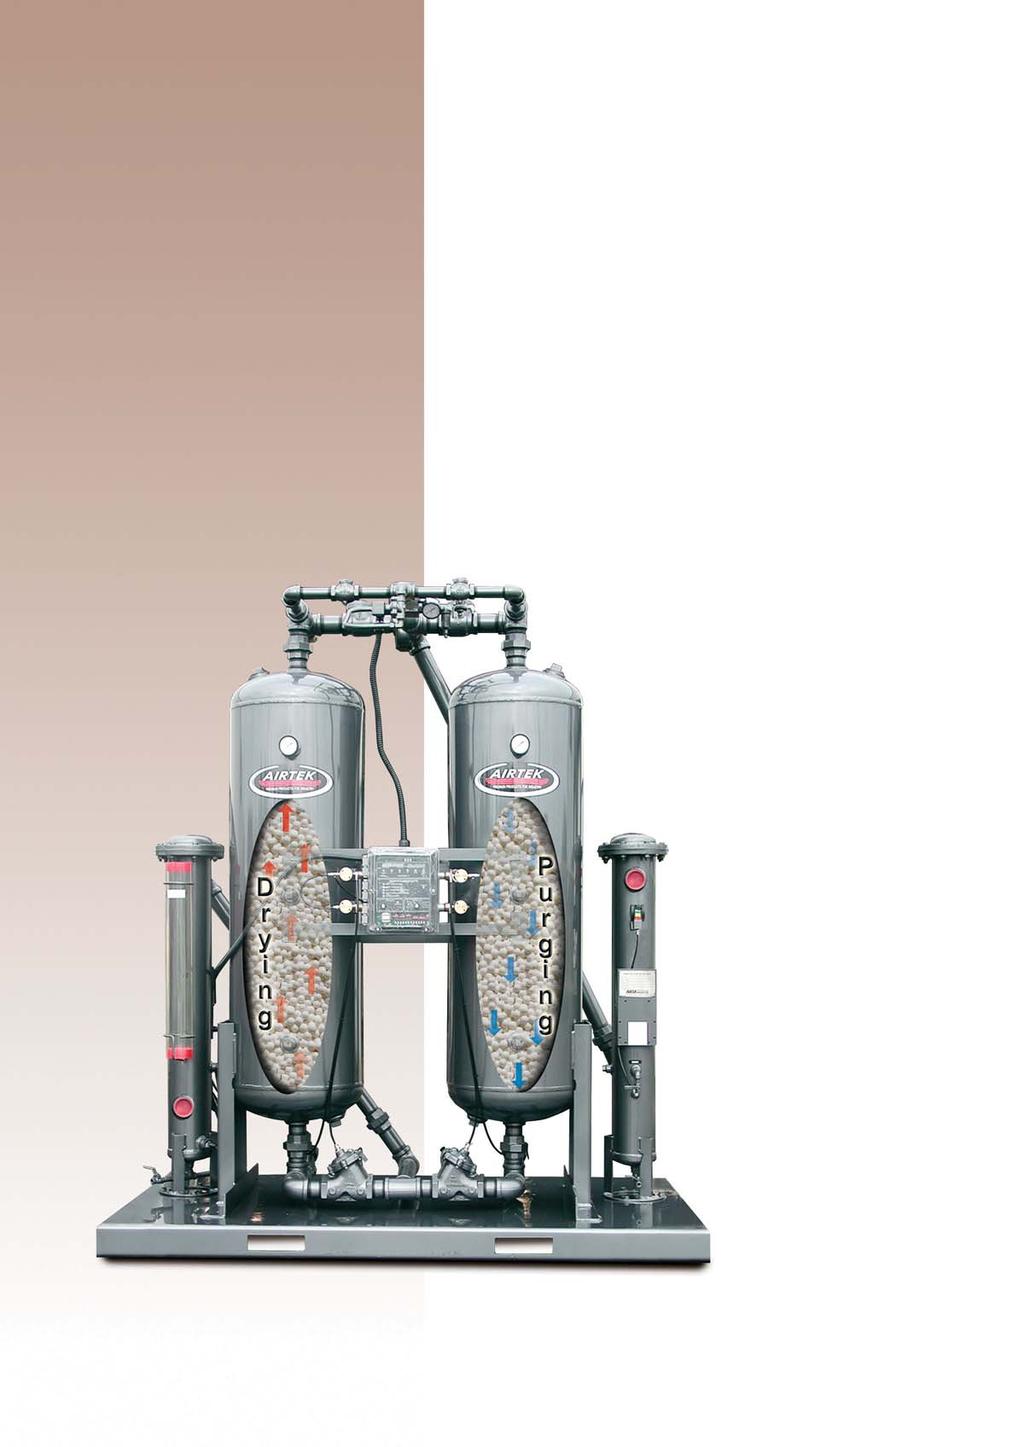 Heatless Air Dryer Operation Airtek Heatless Dryers remove water vapor from compressed air through a process known as Pressure Swing Adsorption.